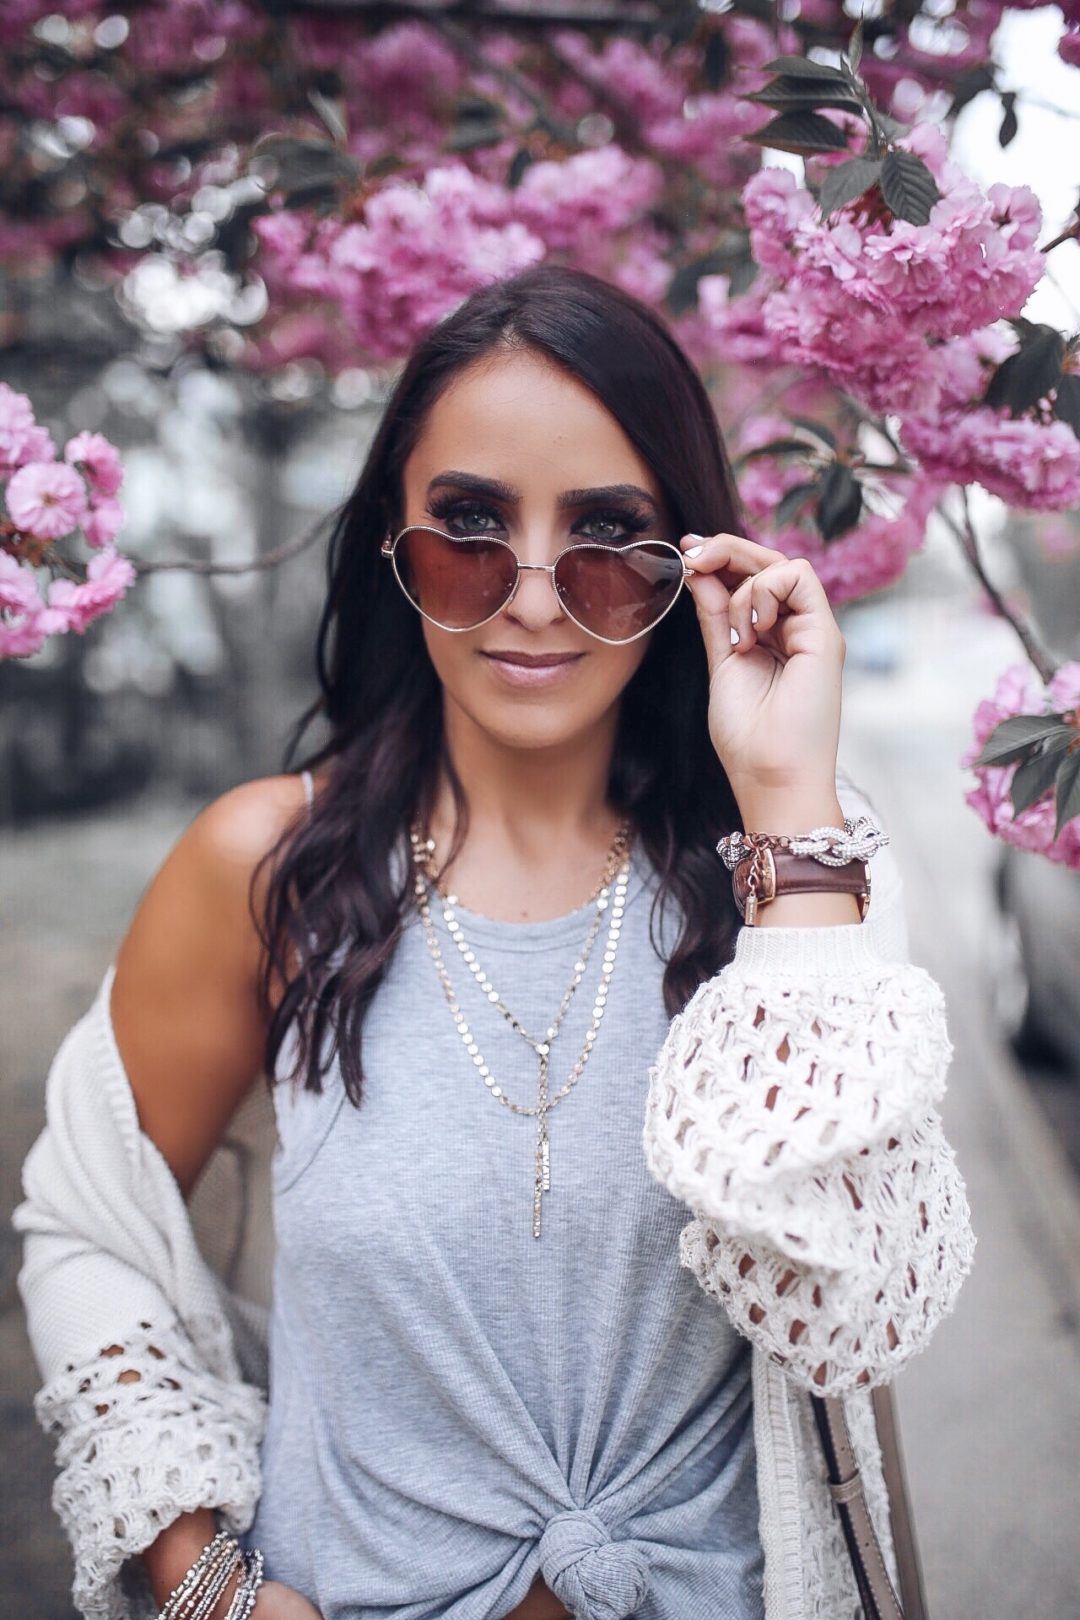 Blogger Sarah Lindner of The House of Sequins wearing Free people gray tank top. Marc Fisher wedges. Baublebar layered necklace. Heart sunglasses. Sole Society bag